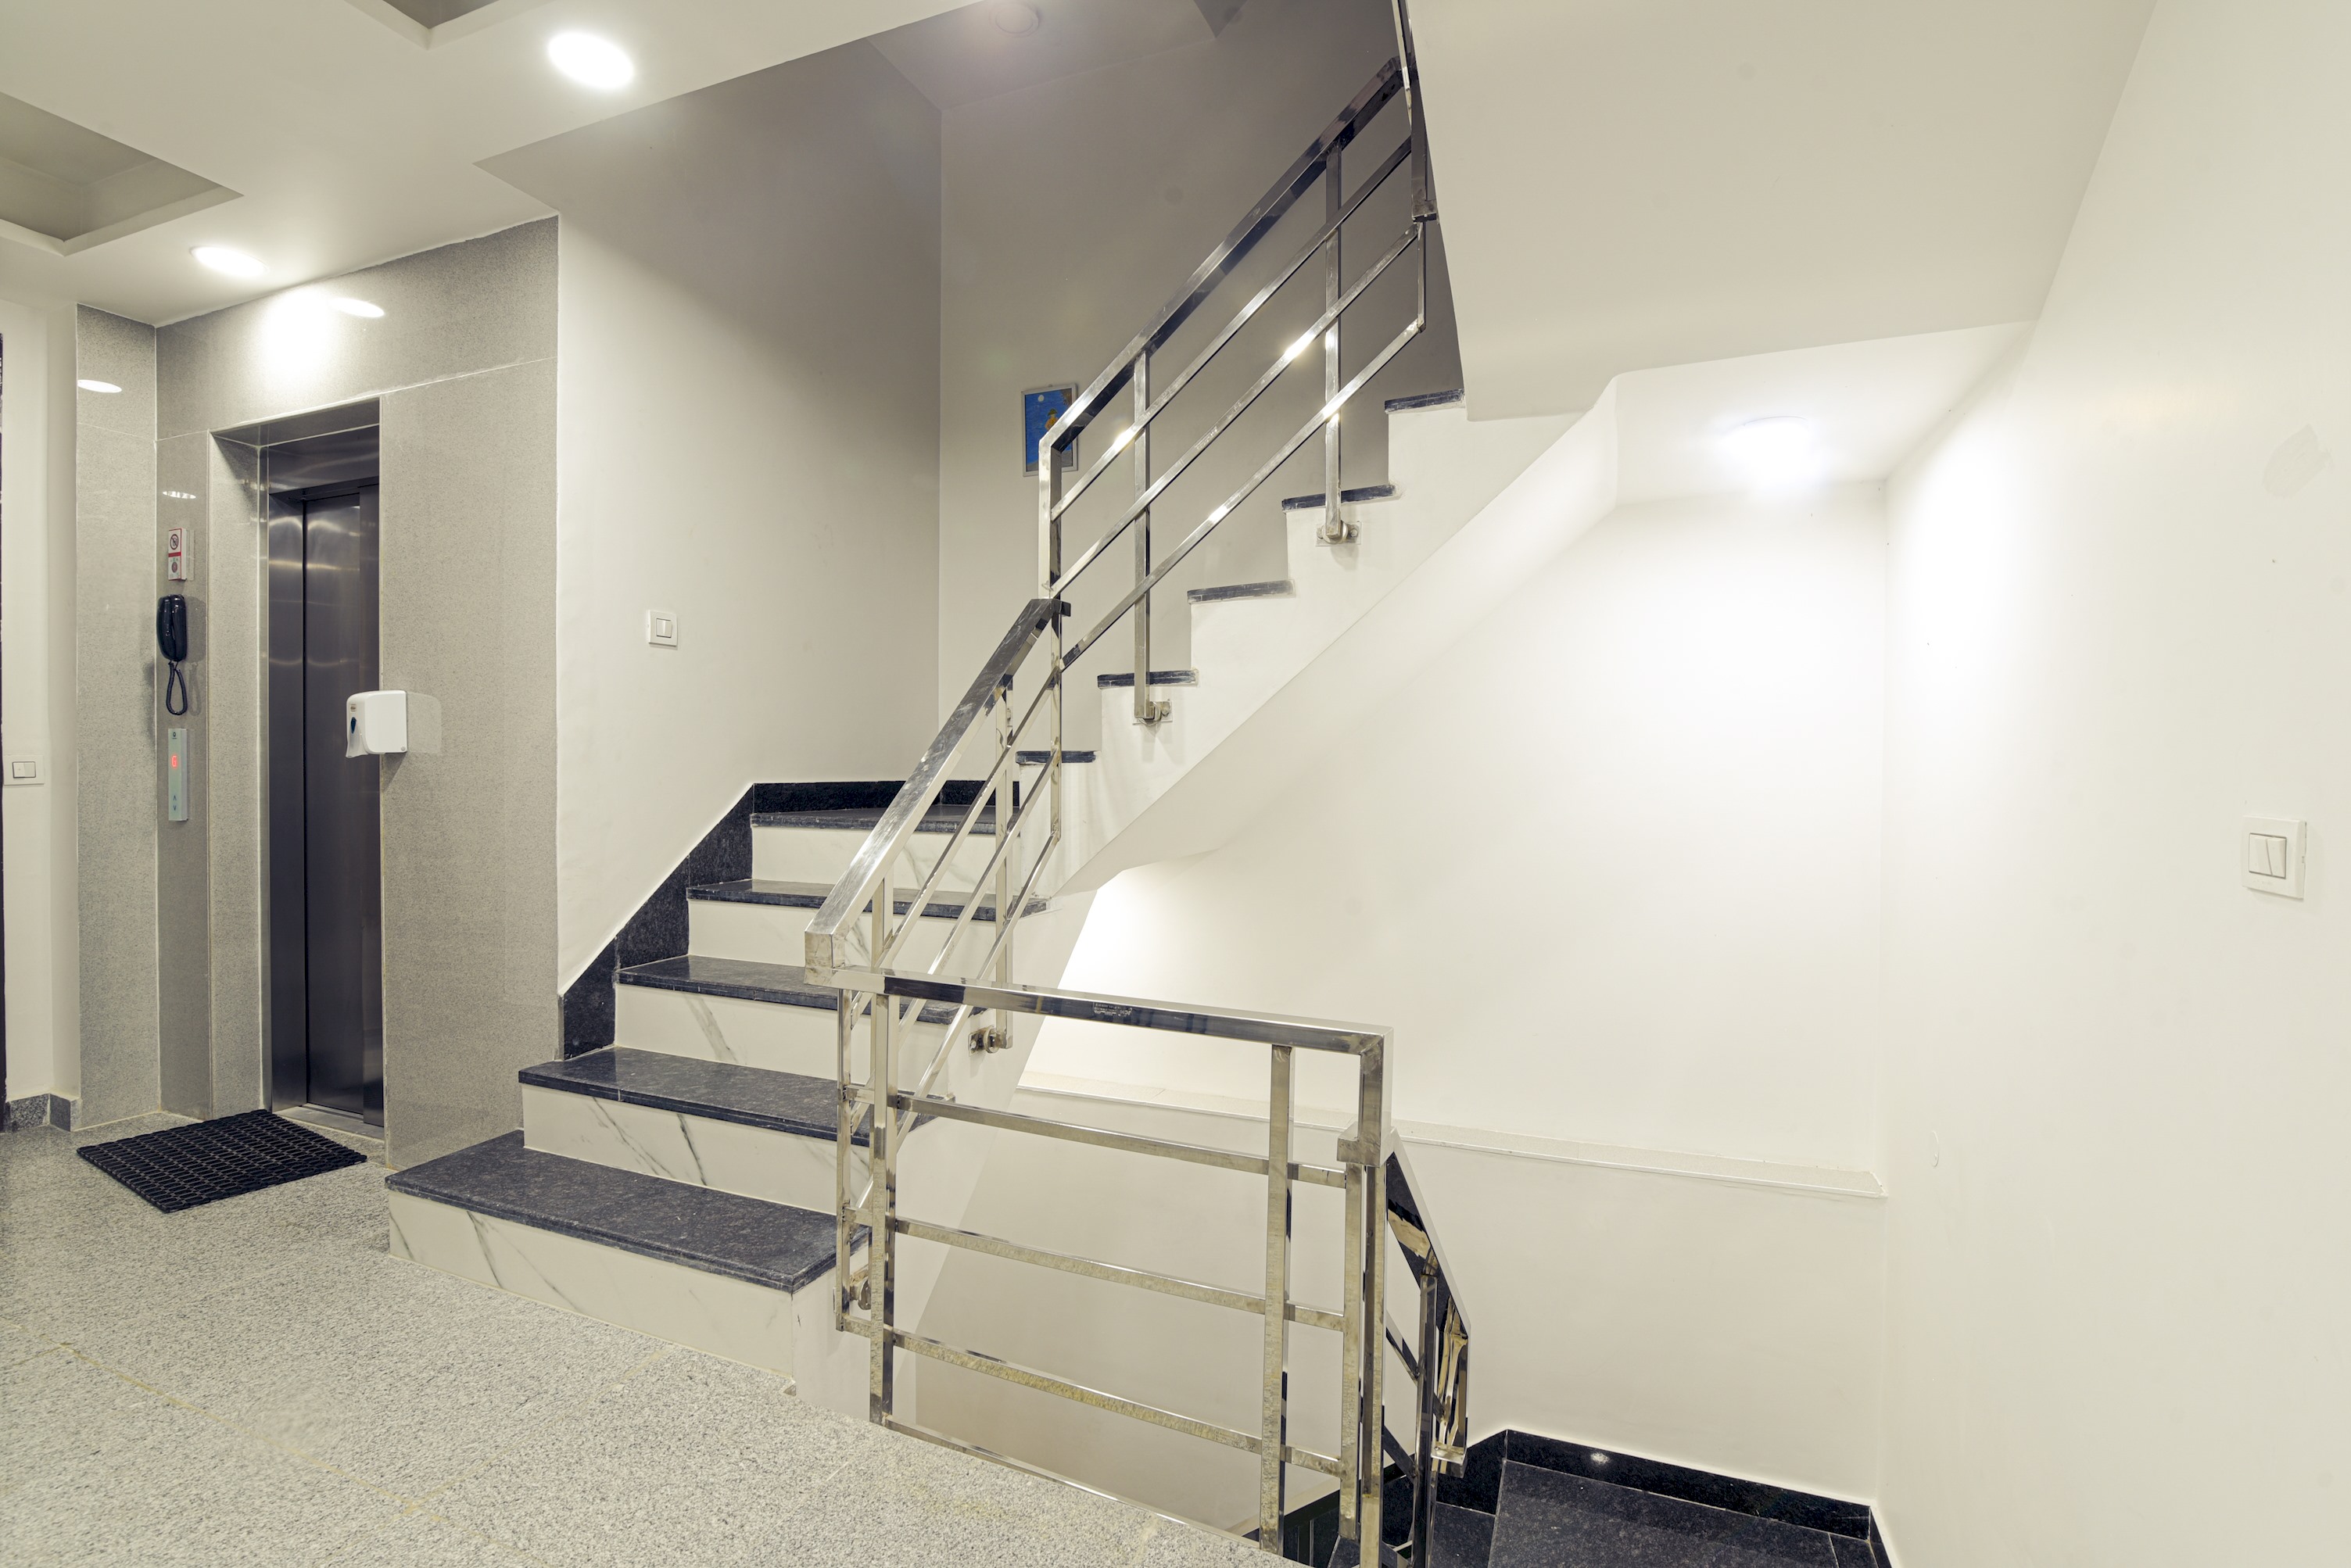  A split image featuring a modern elevator and a classic staircase, highlighting the options for vertical movement in a building